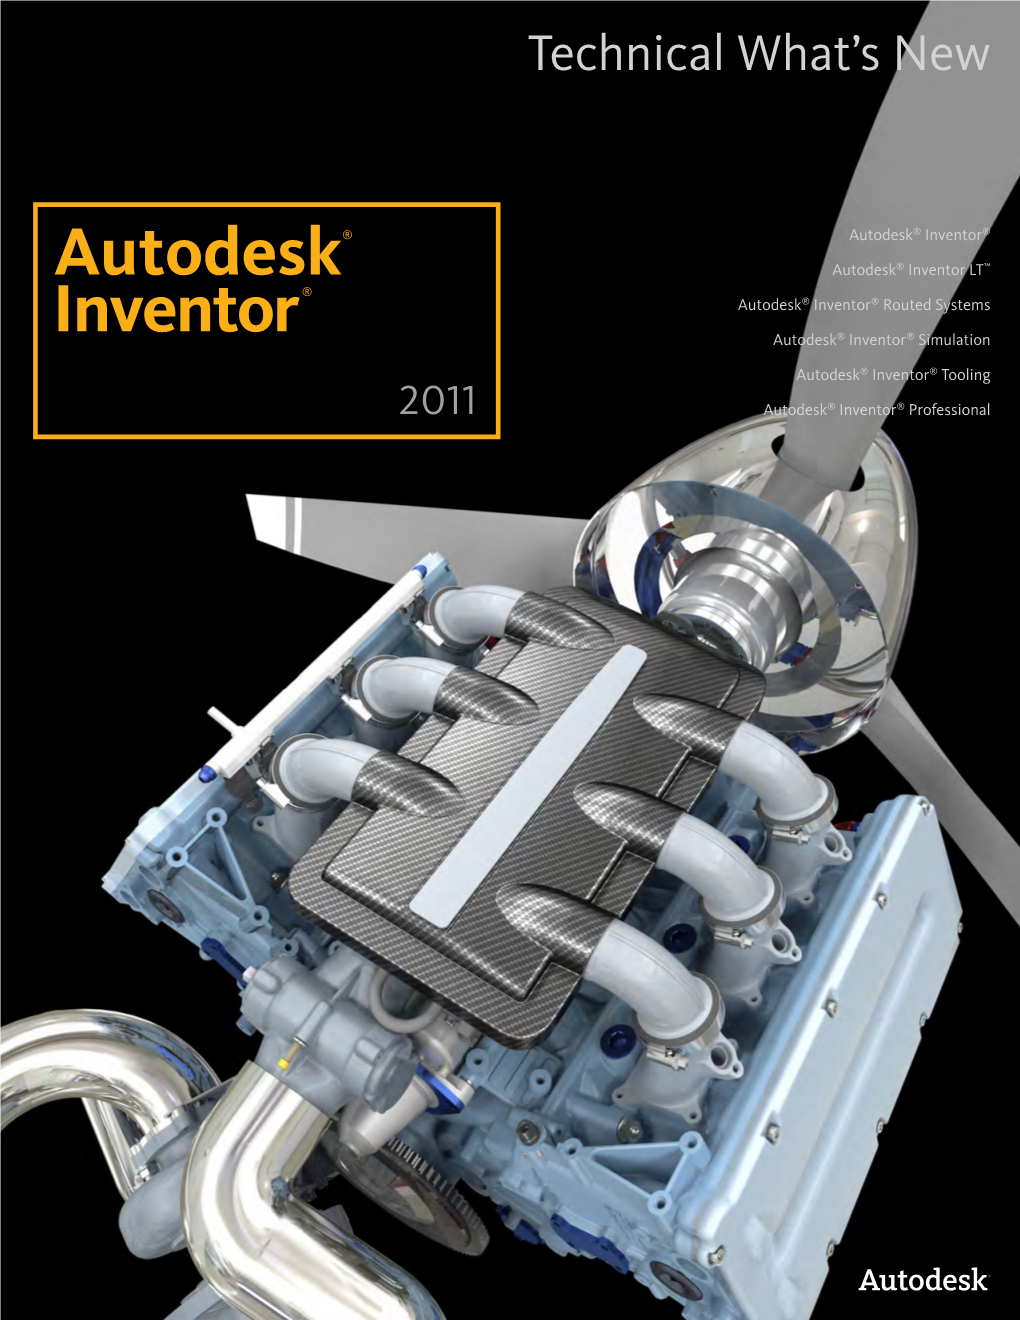 Autodesk® Inventor® Autodesk Autodesk® Inventor LT™ ® Autodesk® Inventor® Routed Systems